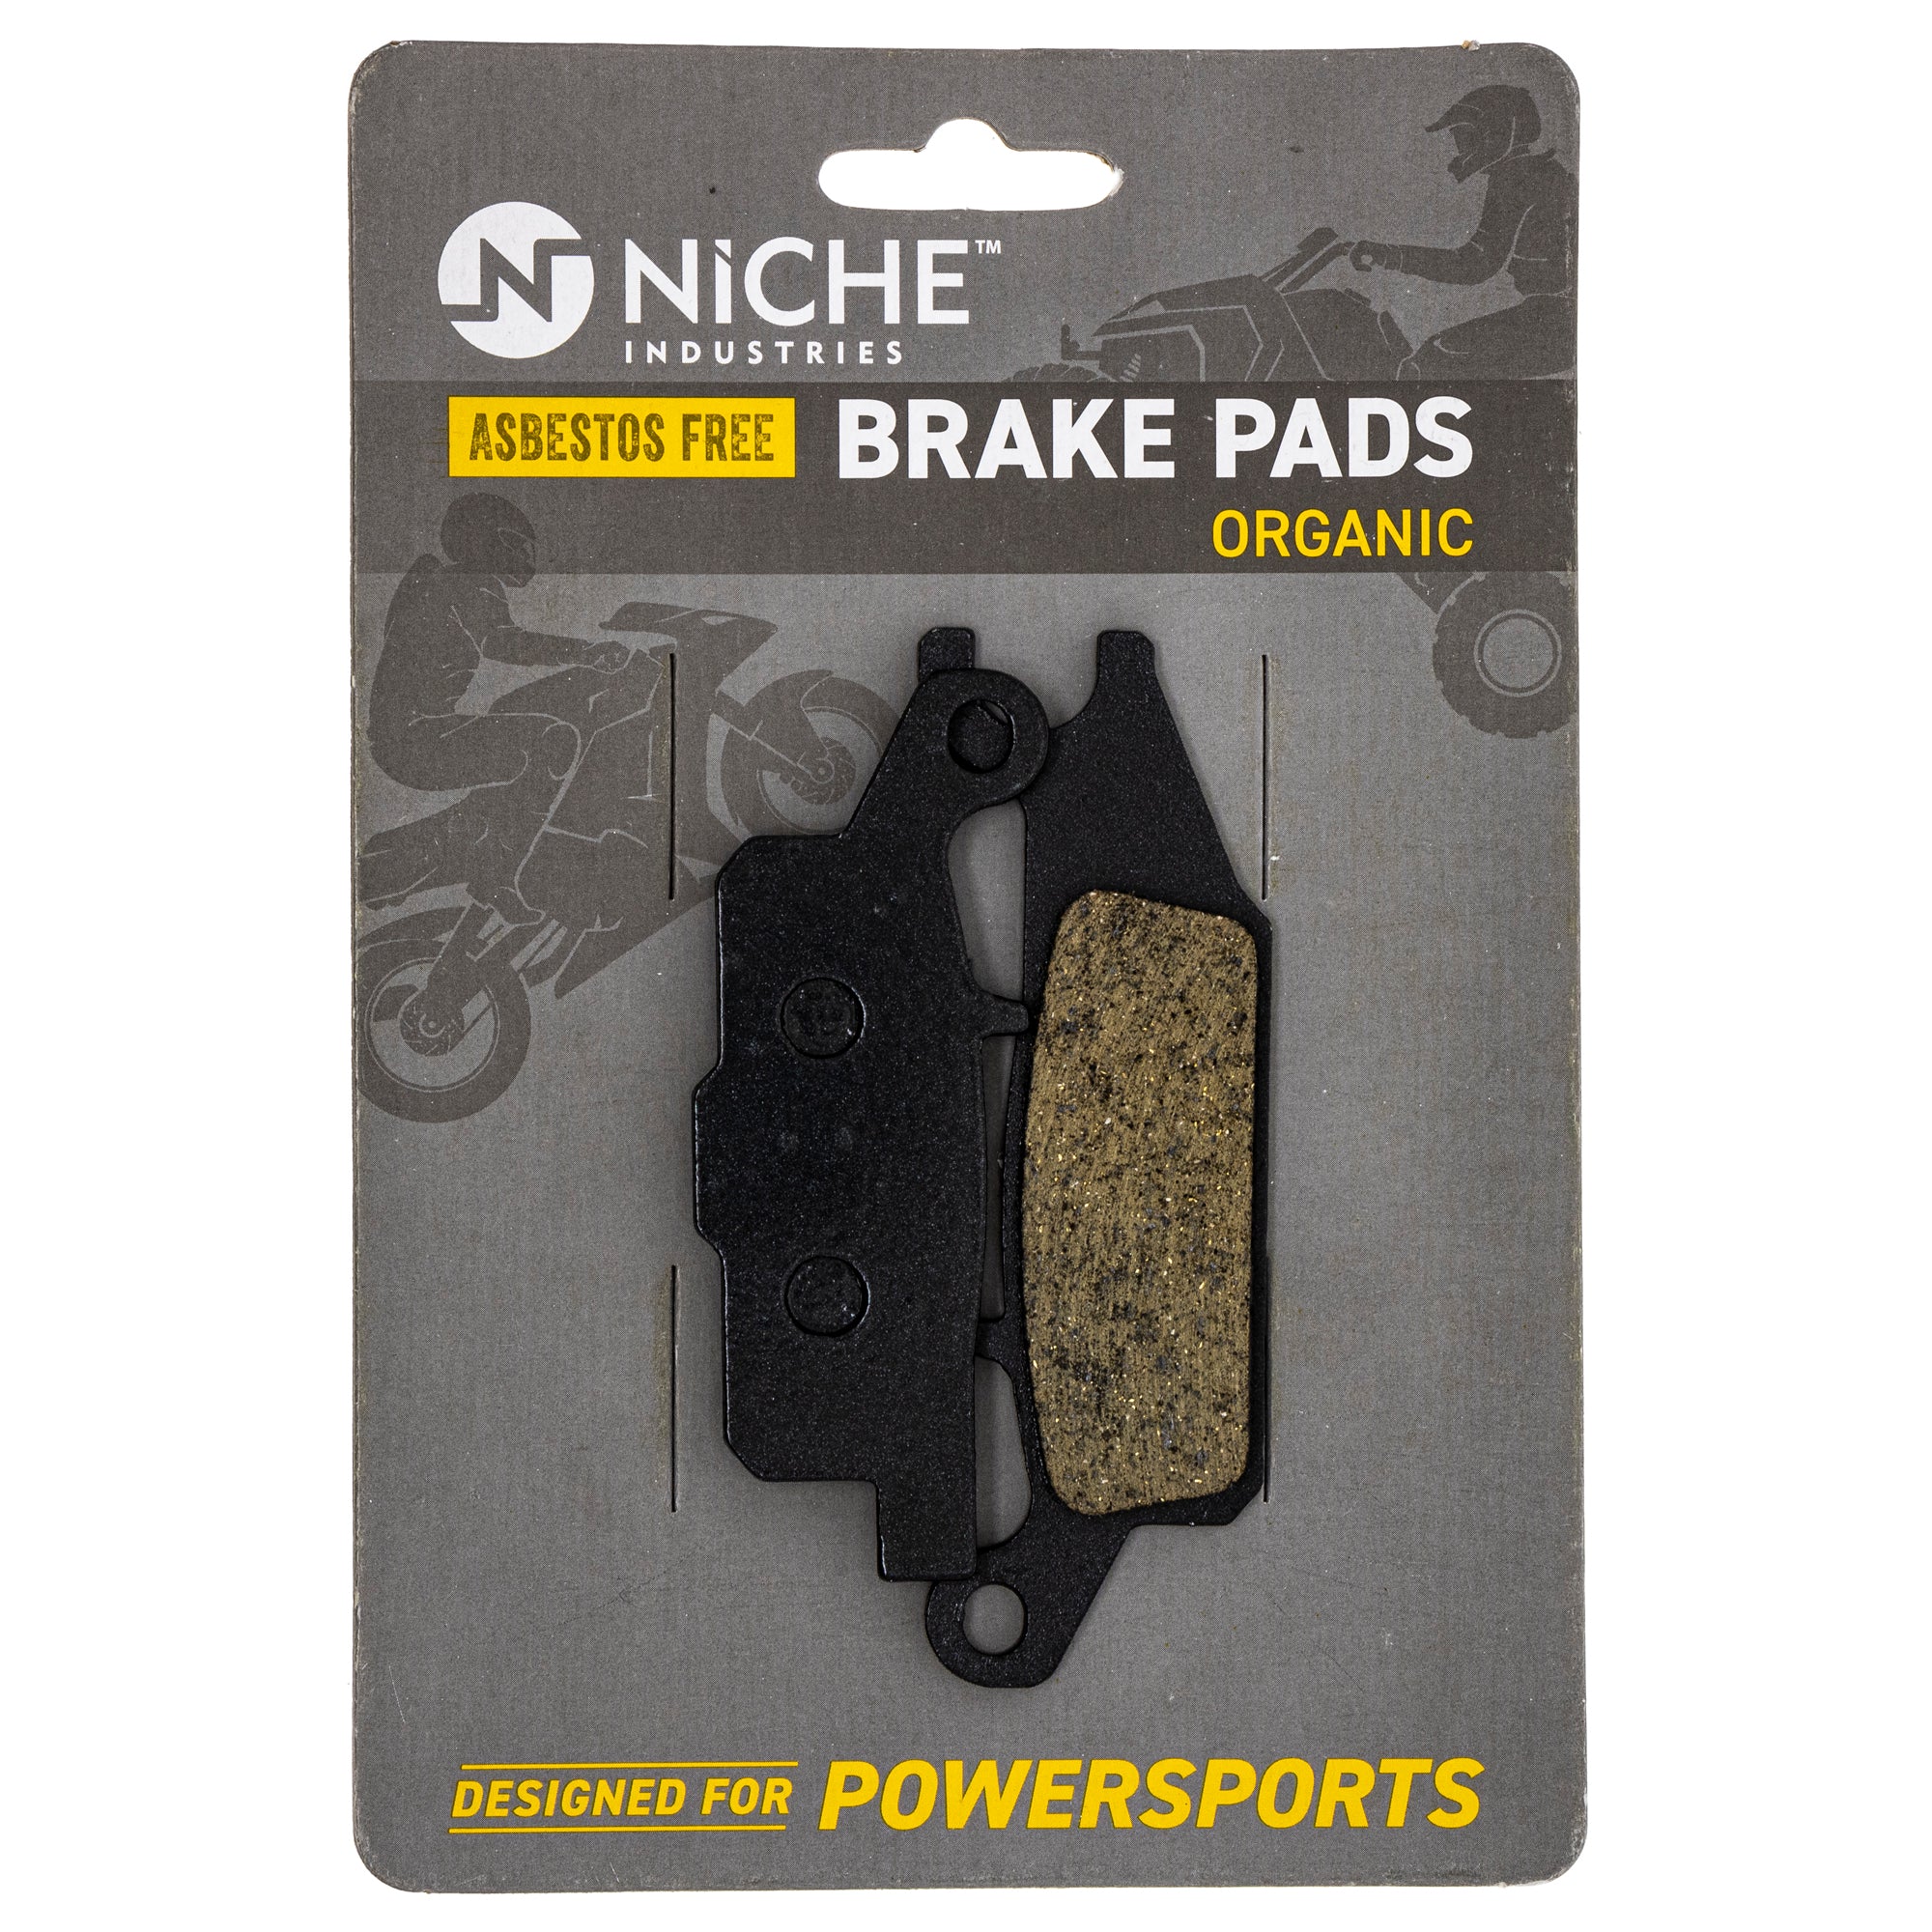 NICHE MK1001580 Brake Pad Kit Front/Rear for Yamaha Grizzly